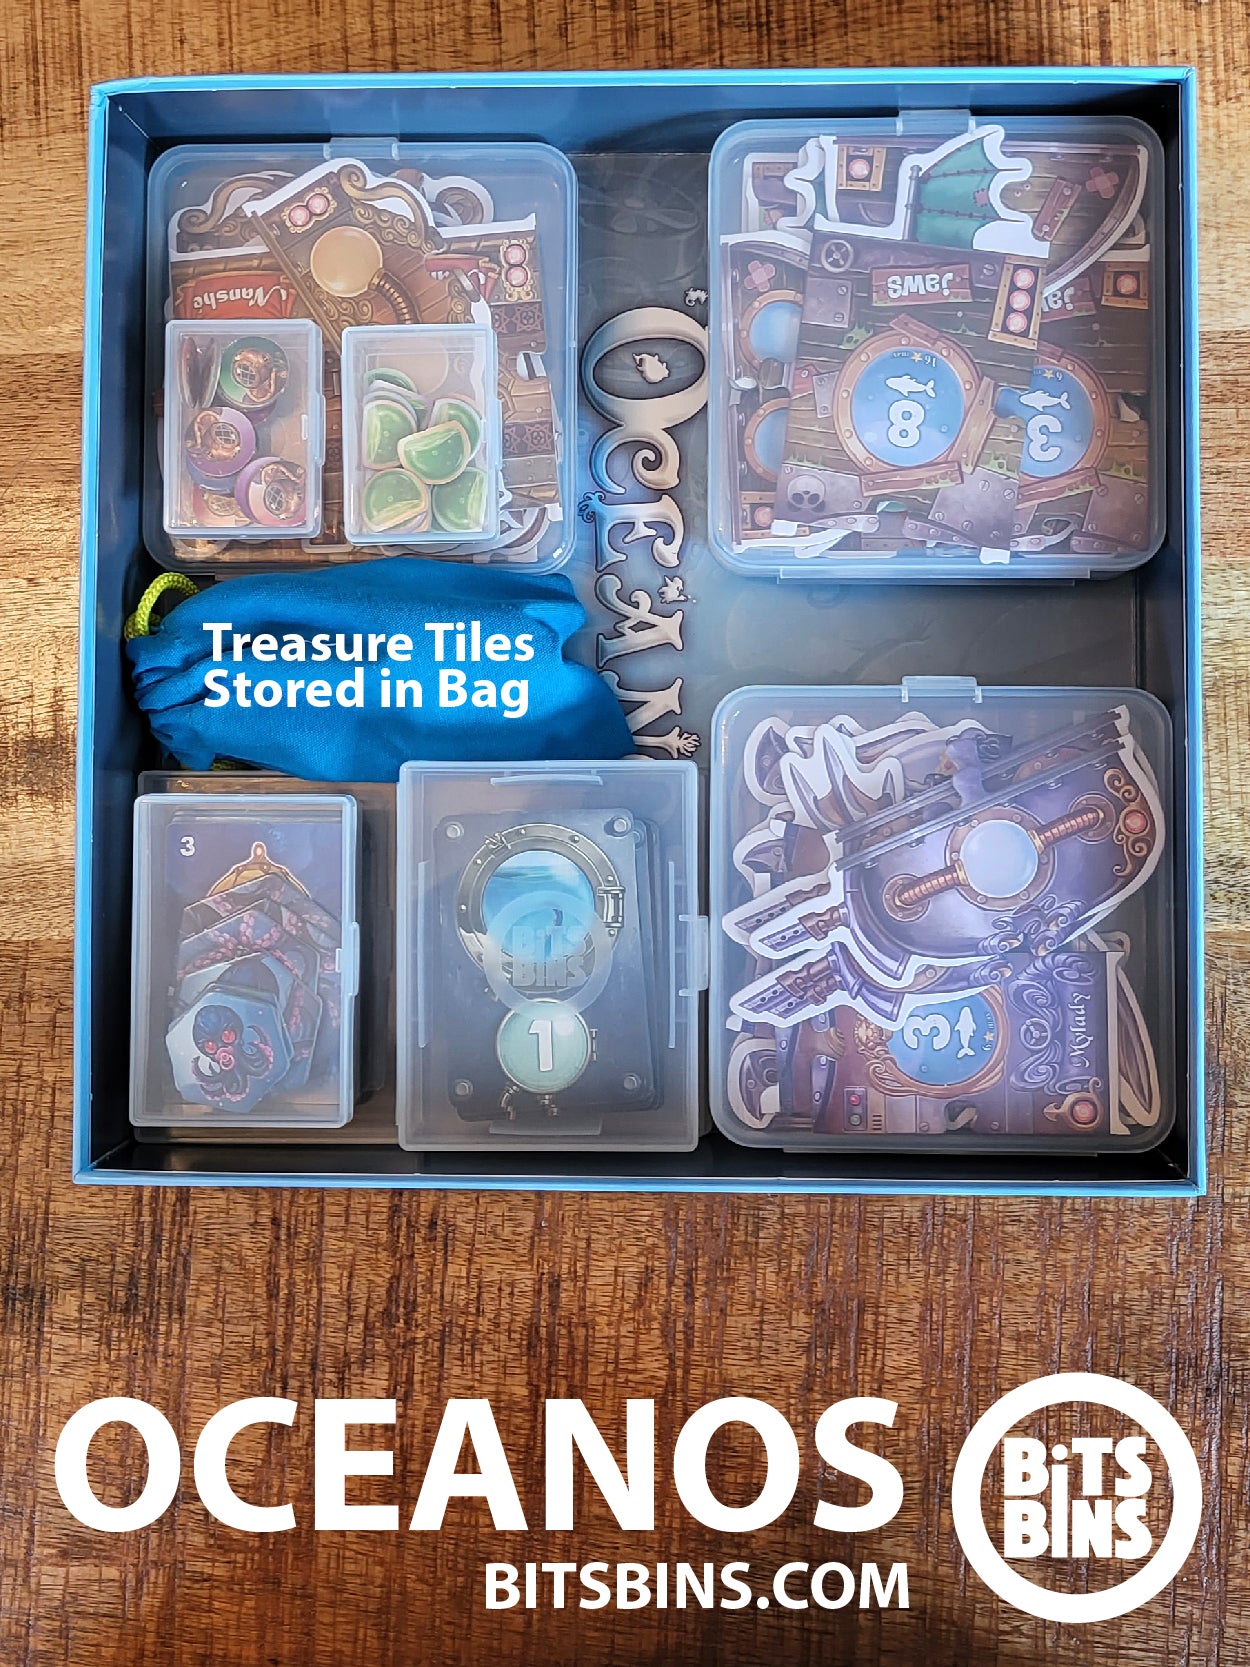 RECOMMENDED OCEANOS BitsBins - 2 Minis, 1 XL, 3 Card Boxes, 5 Flats